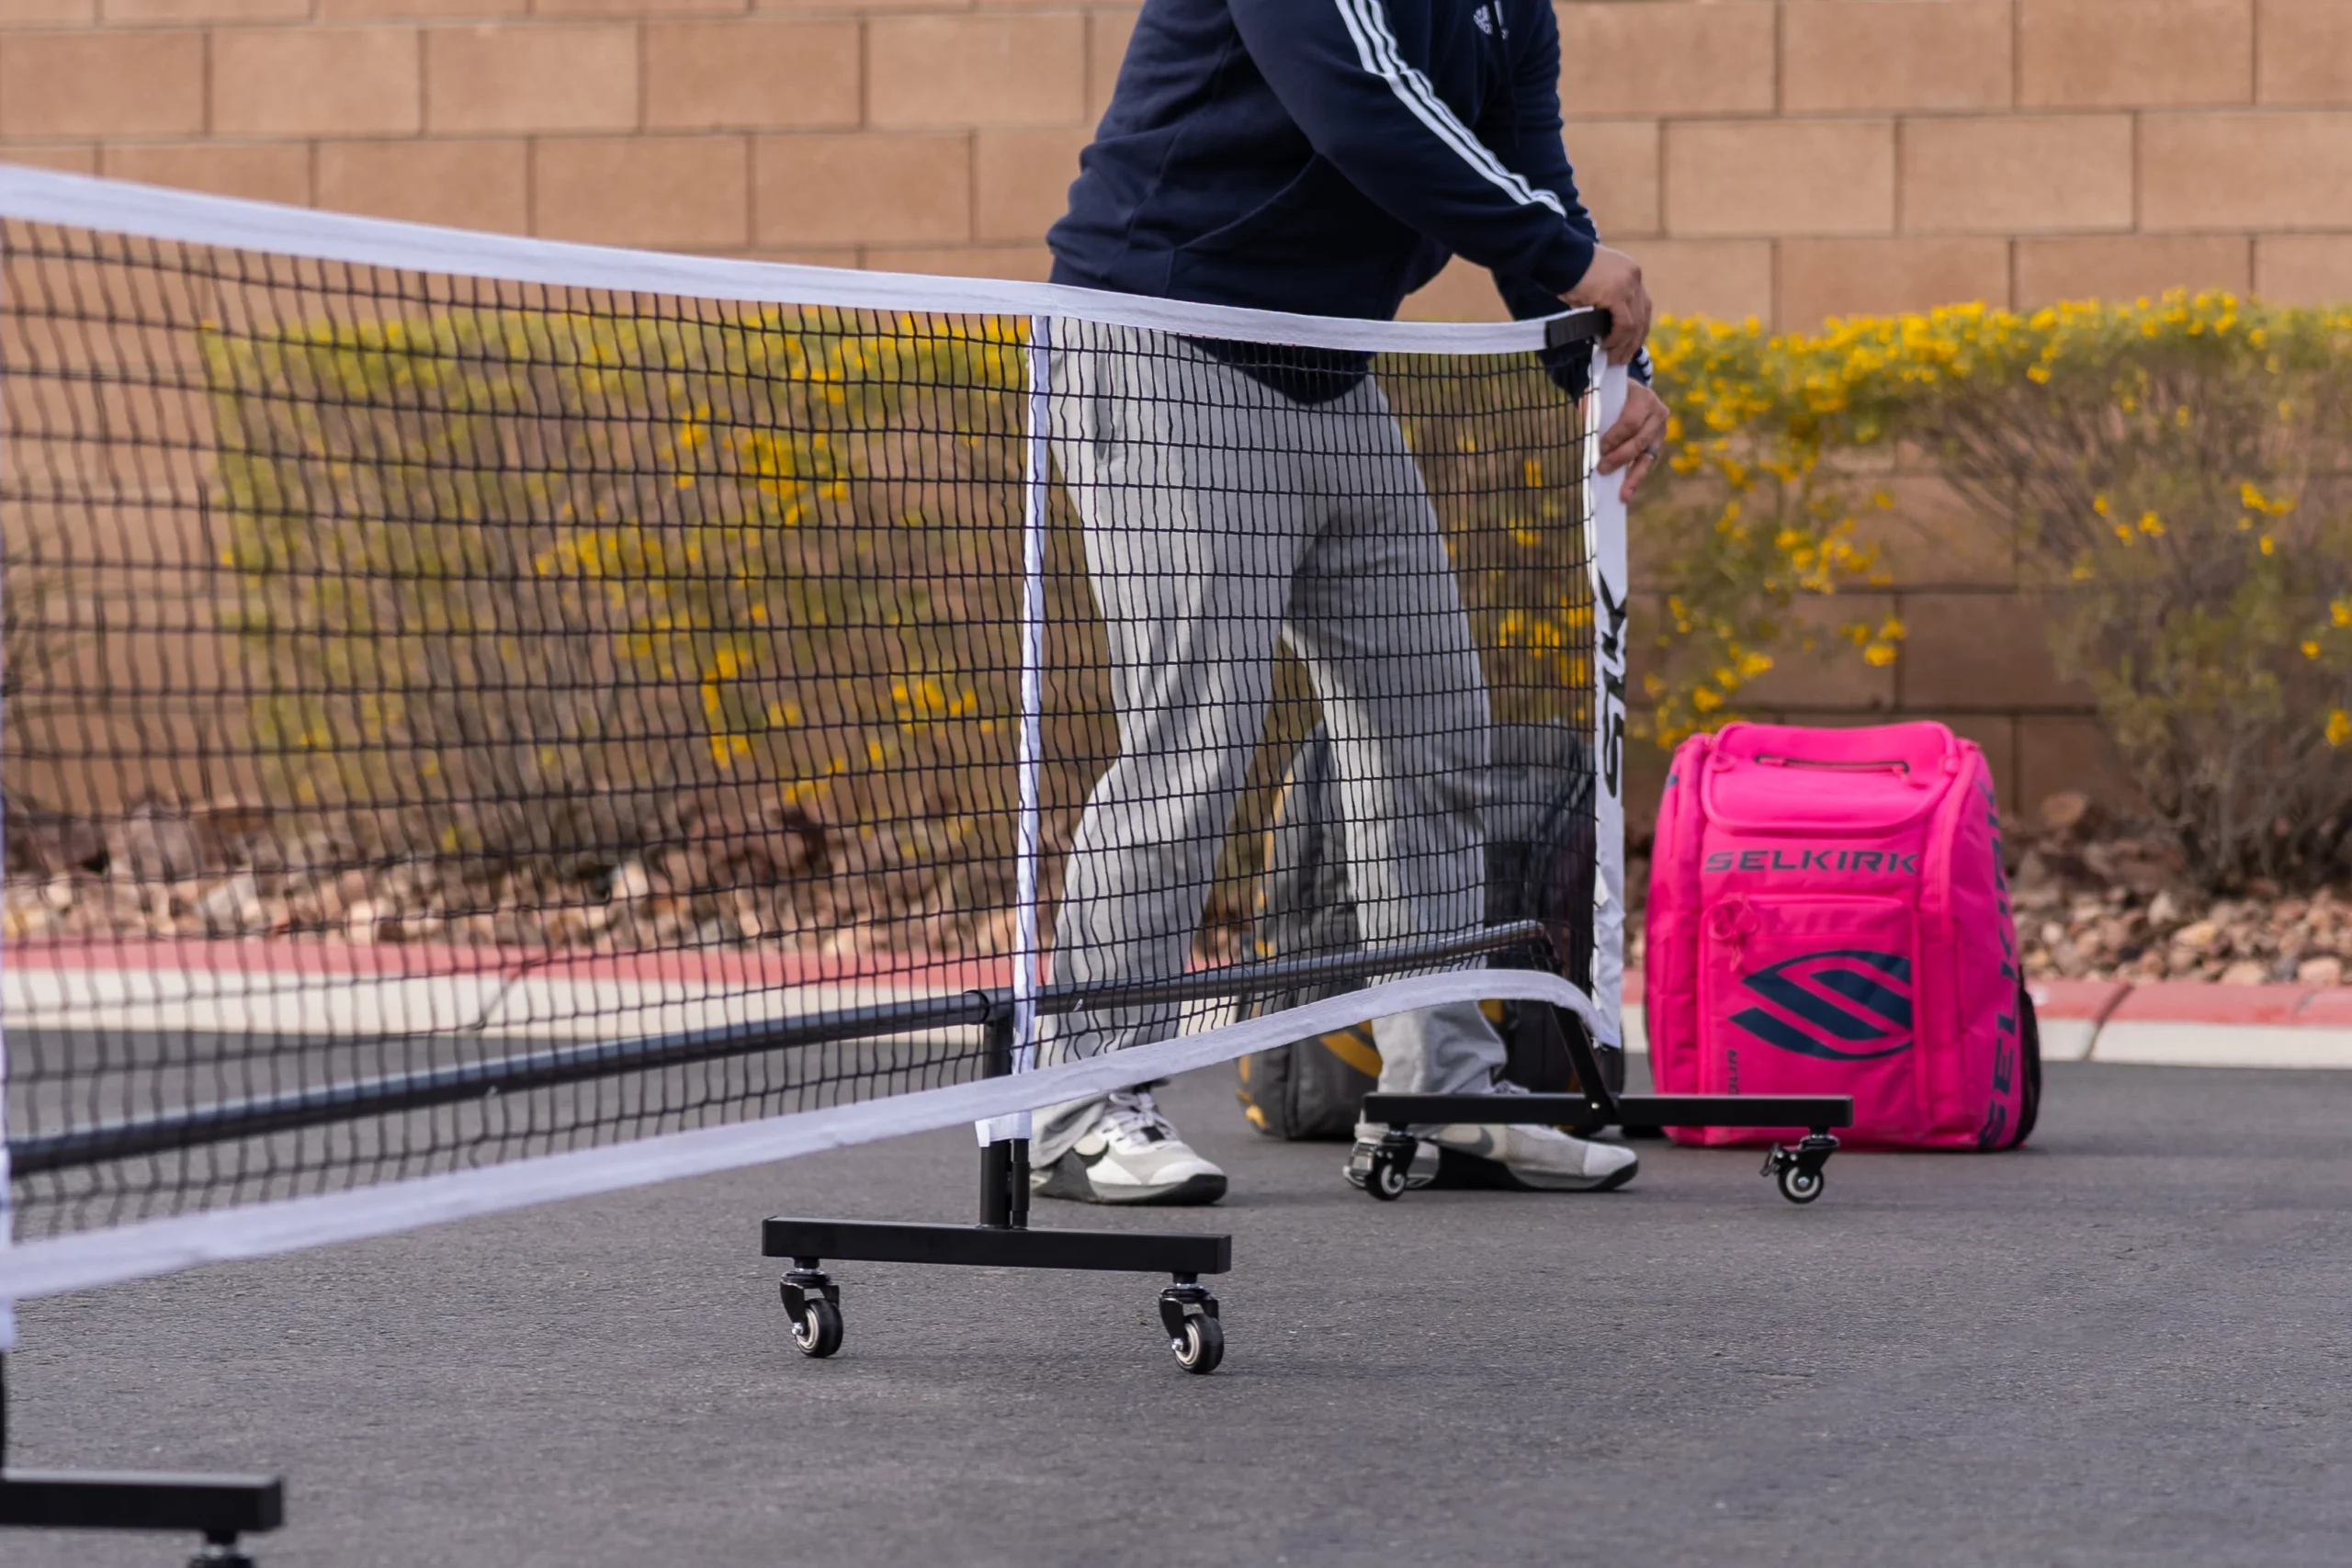 Convert a tennis net to pickleball height easily with this guide.